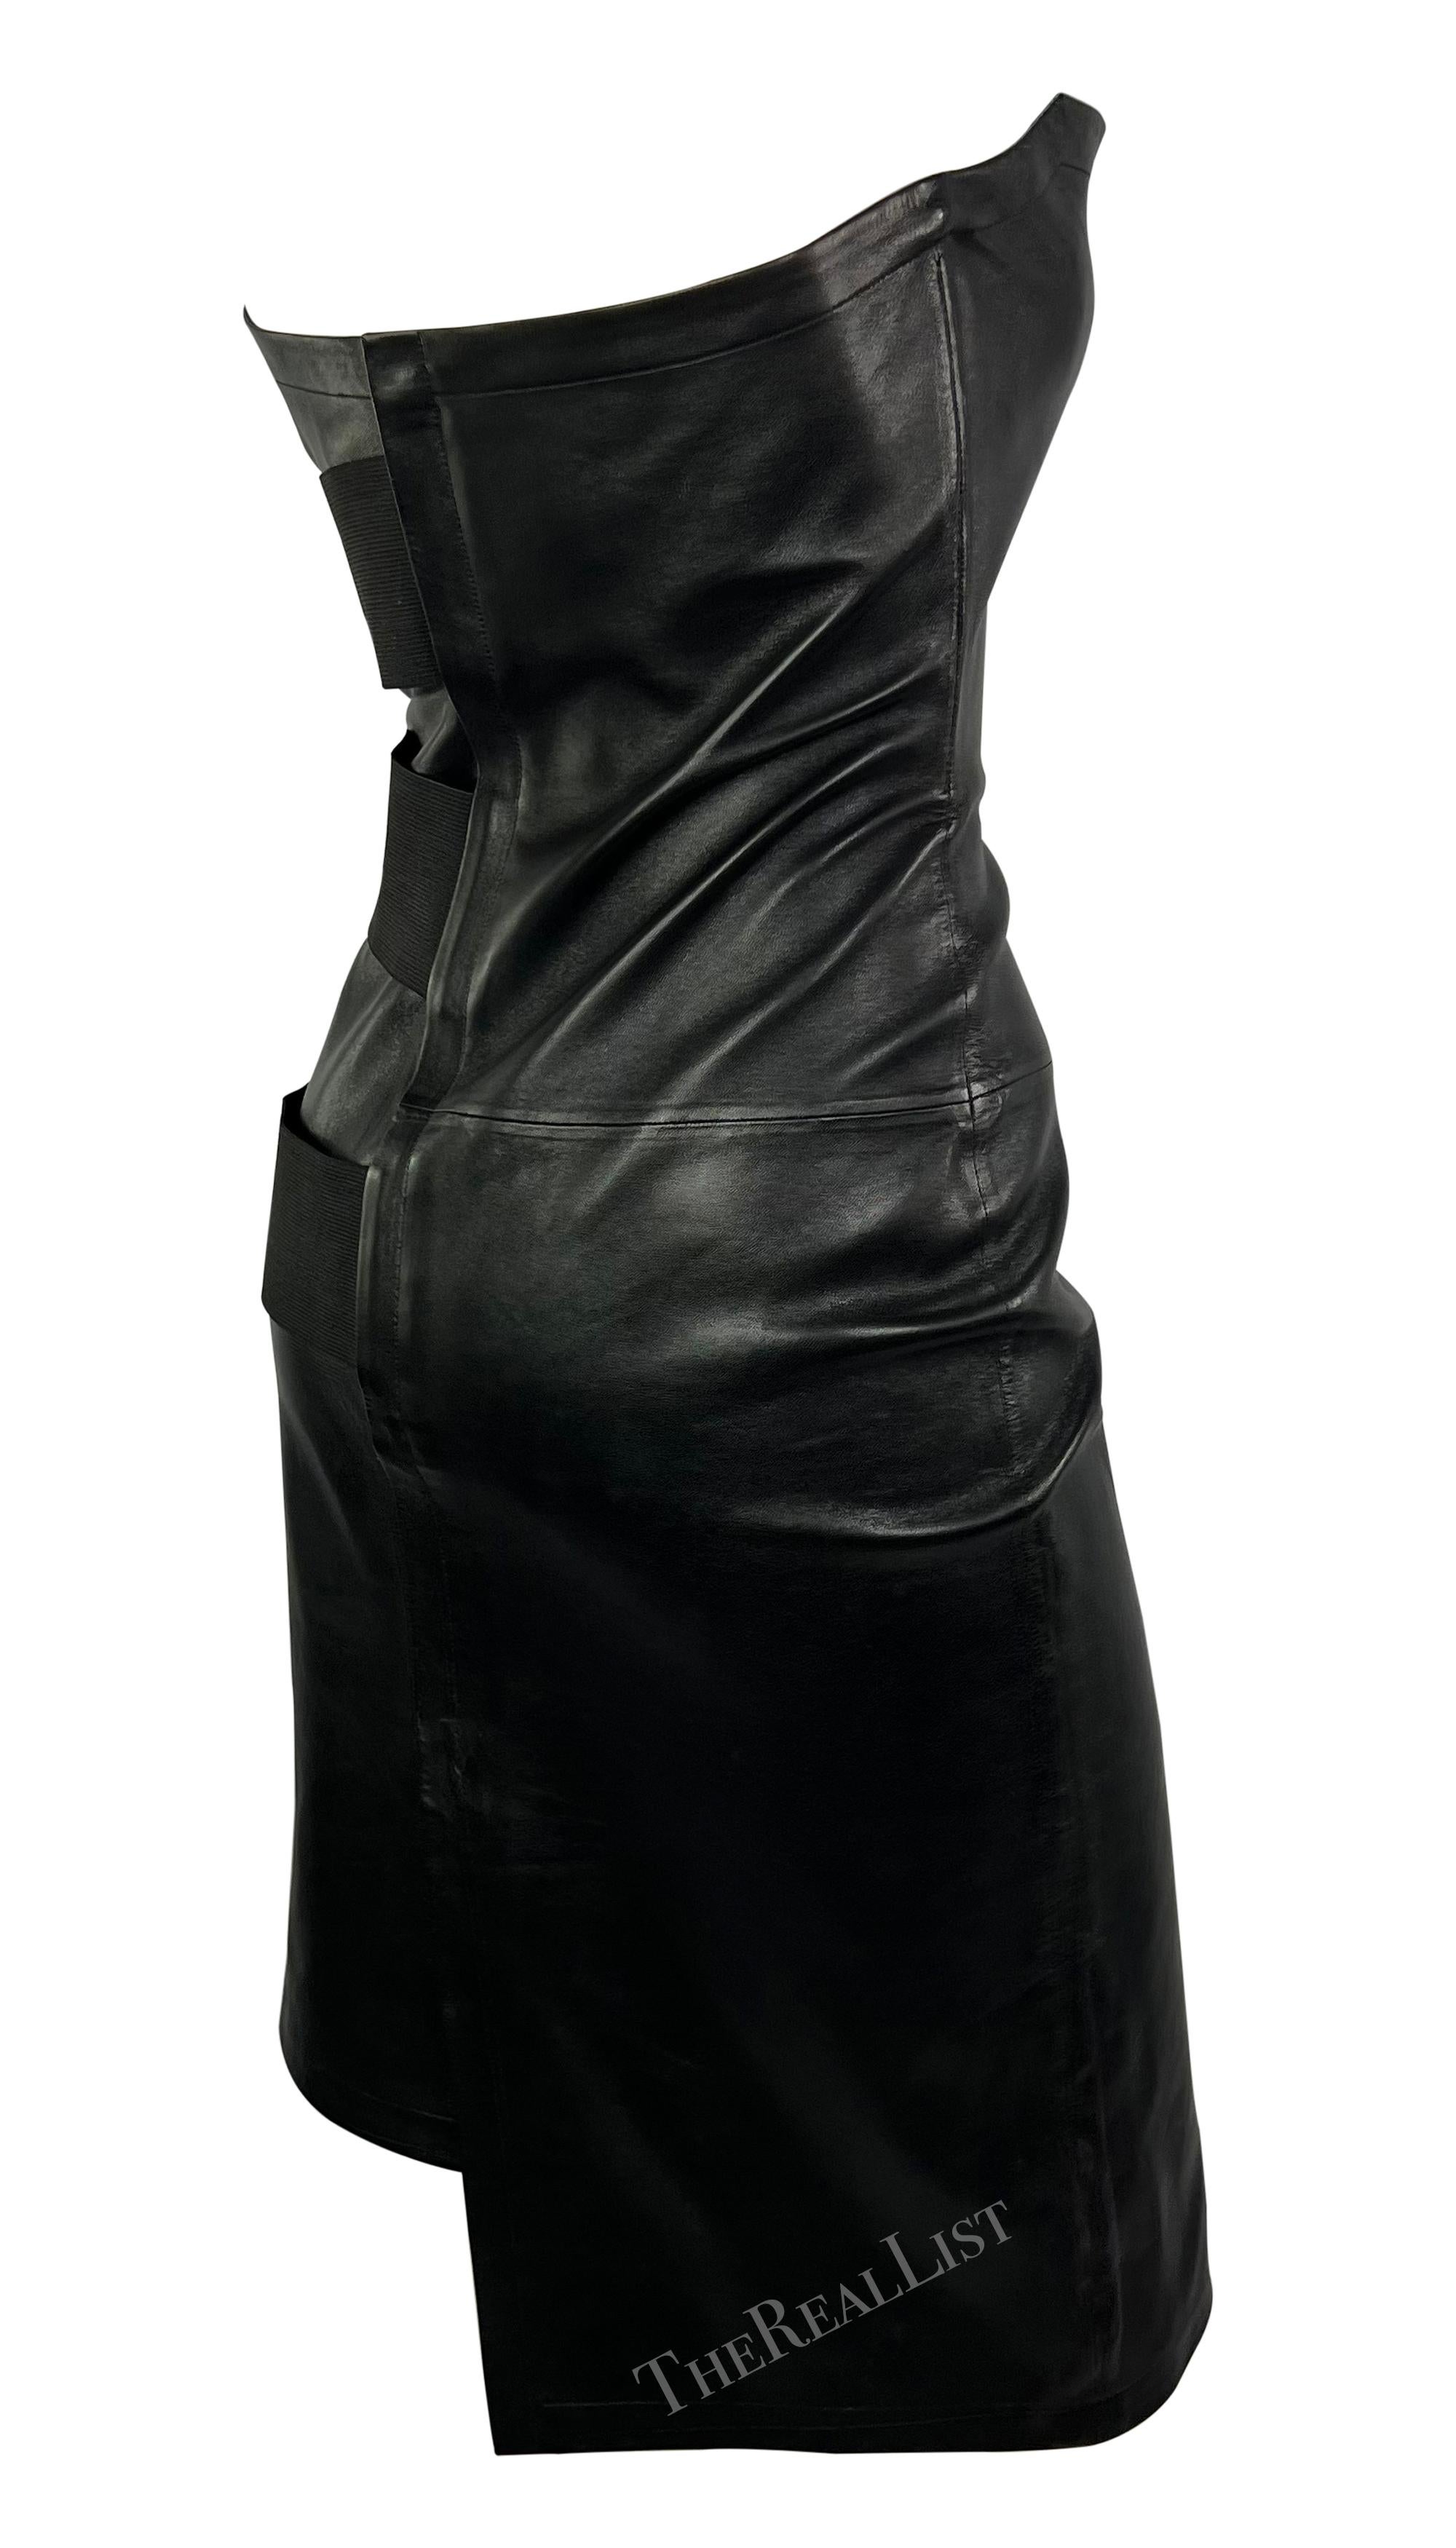 Women's S/S 2001 Yves Saint Laurent by Tom Ford Black Leather Strapless Bandage Dress For Sale